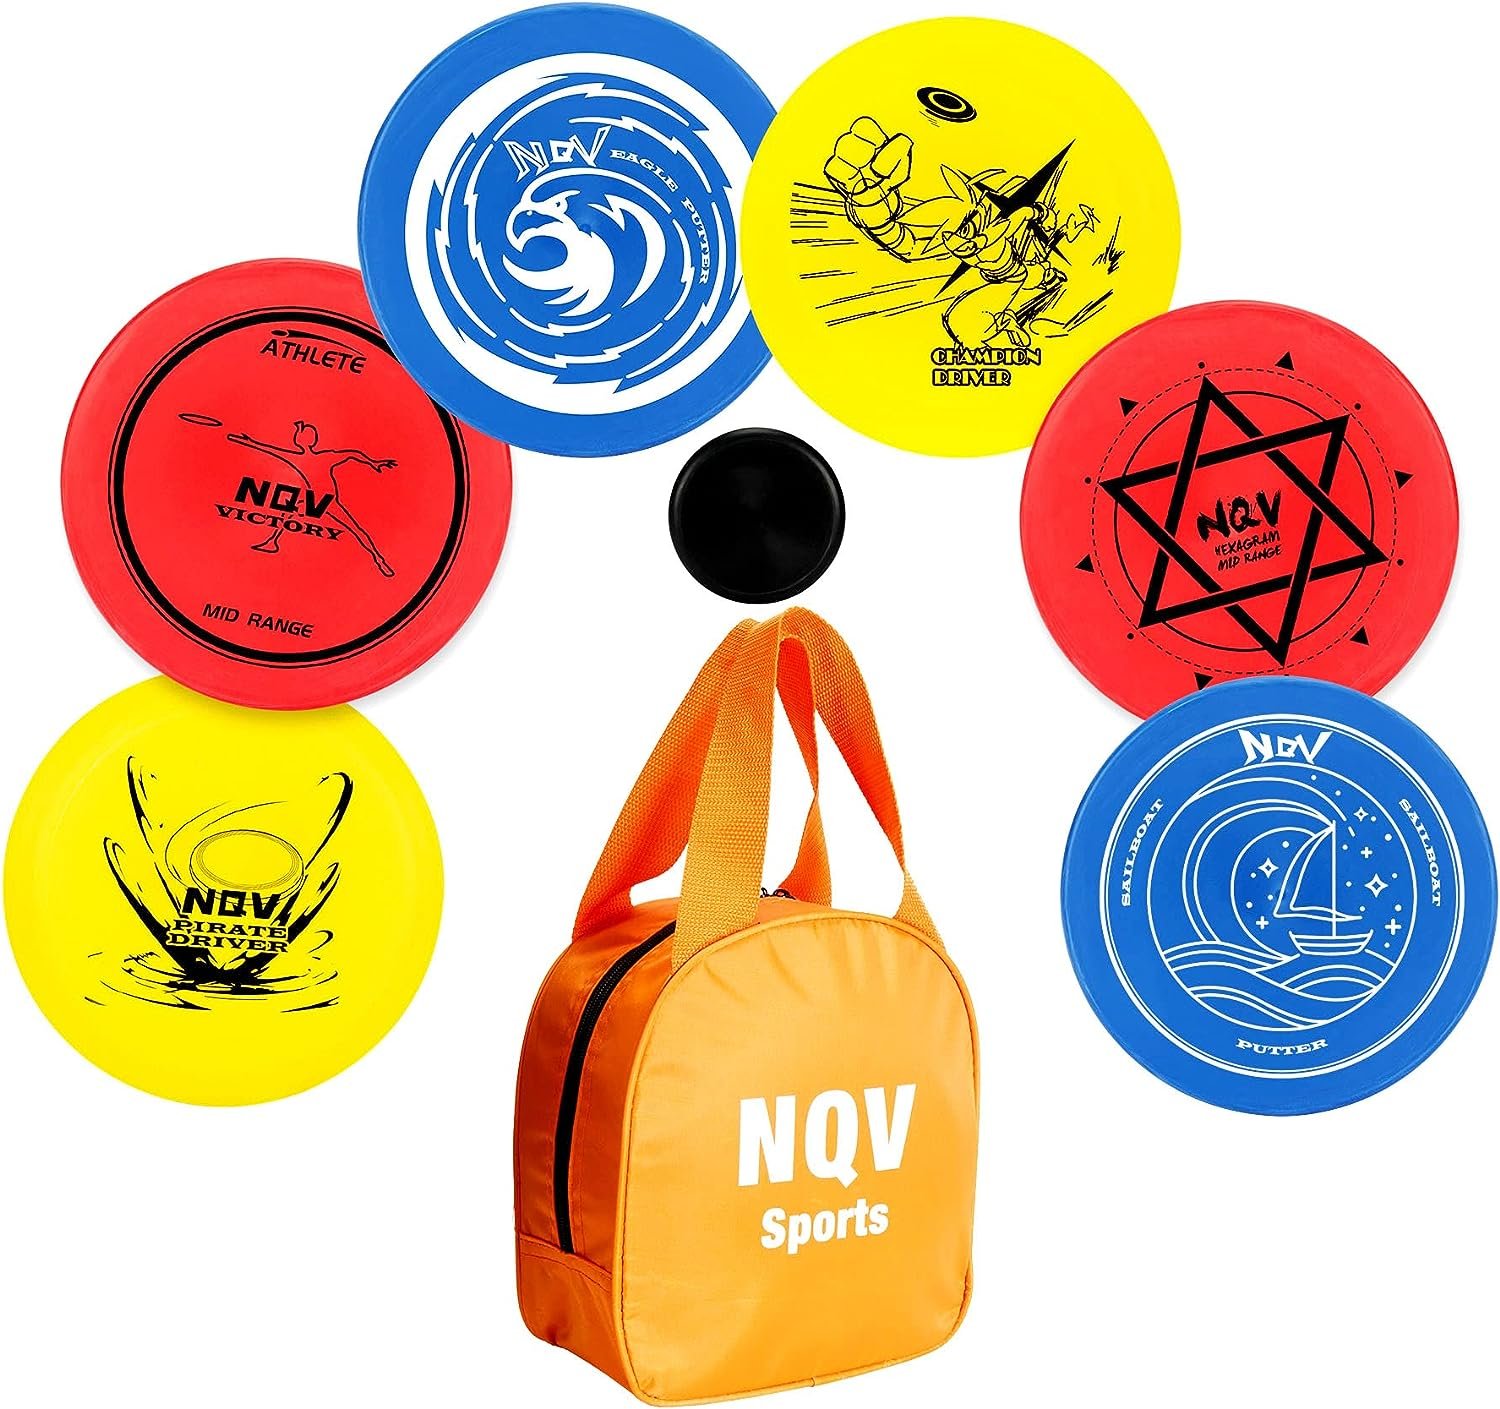 NQV Disc Golf Set with Bag,Disc Golf Beginner Set,6 PCS Flying Discs with Putters Drivers Mid Ranges+1 Disc Golf Bag for Beginners